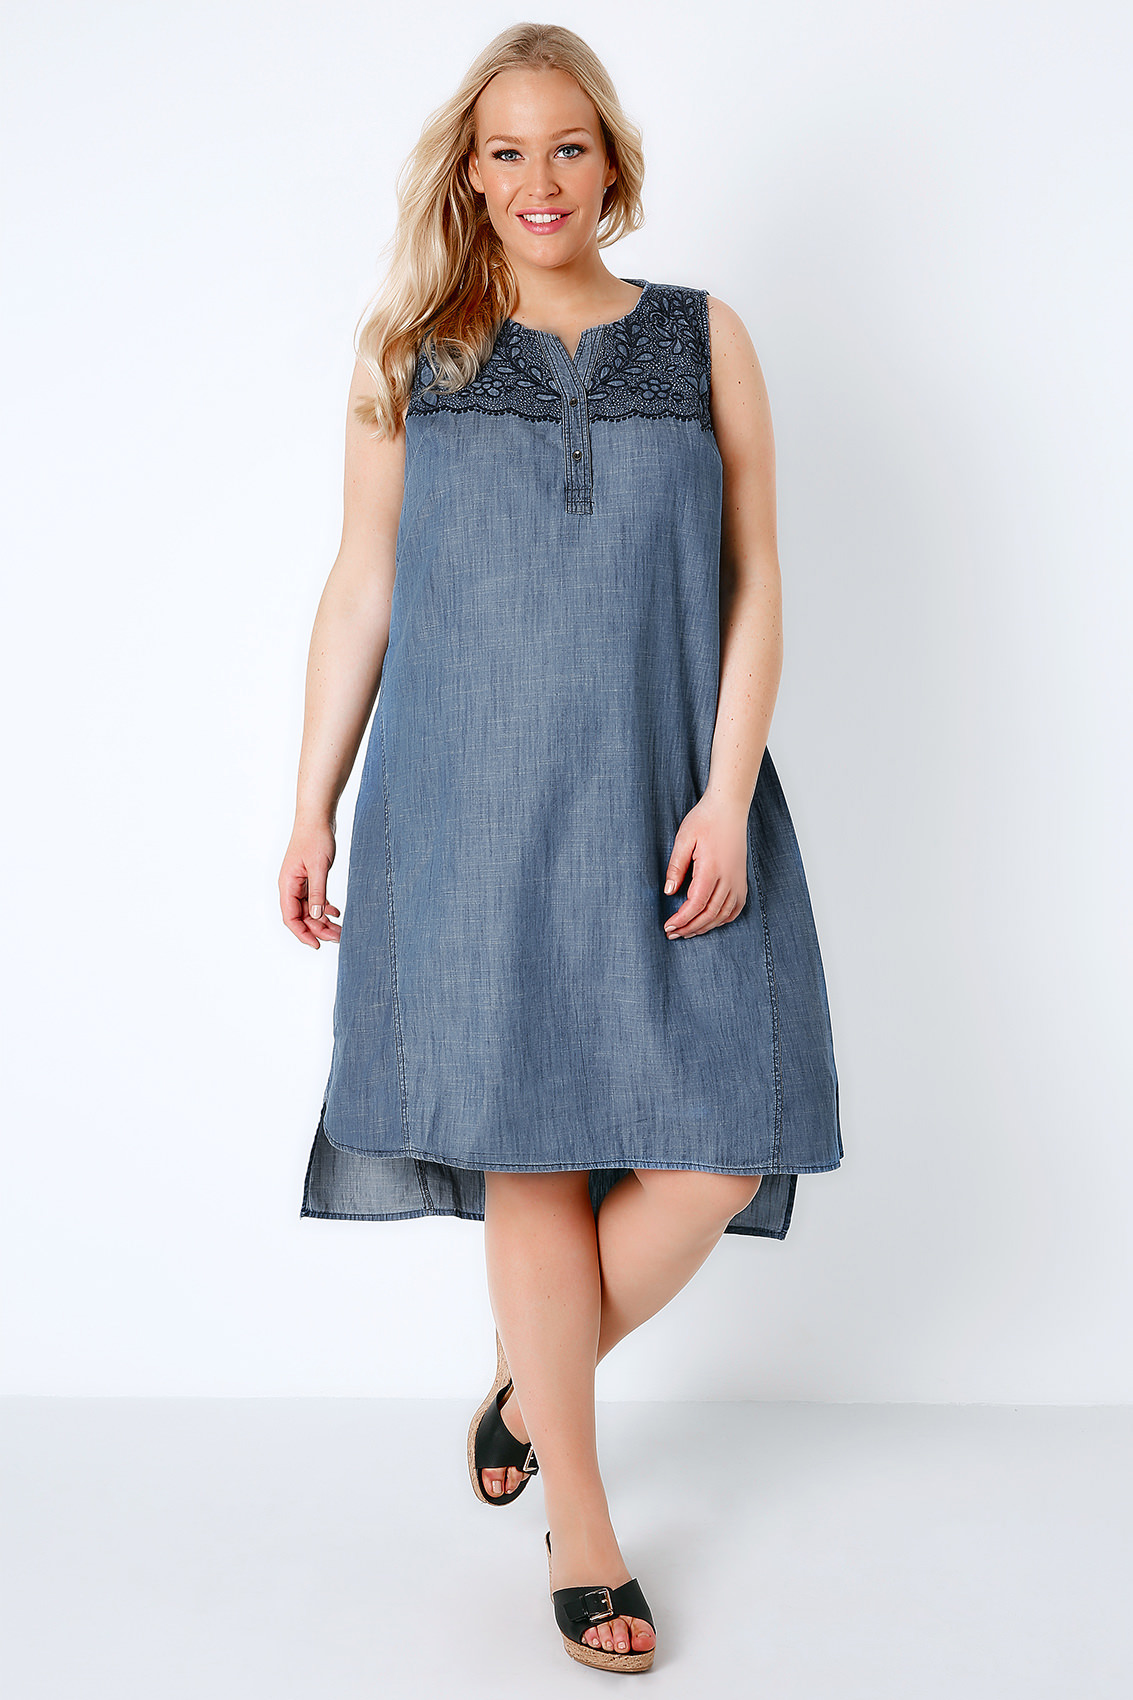 Blue Denim Embroidered Sleeveless Dress With Step Hem, Plus size 16 to 36